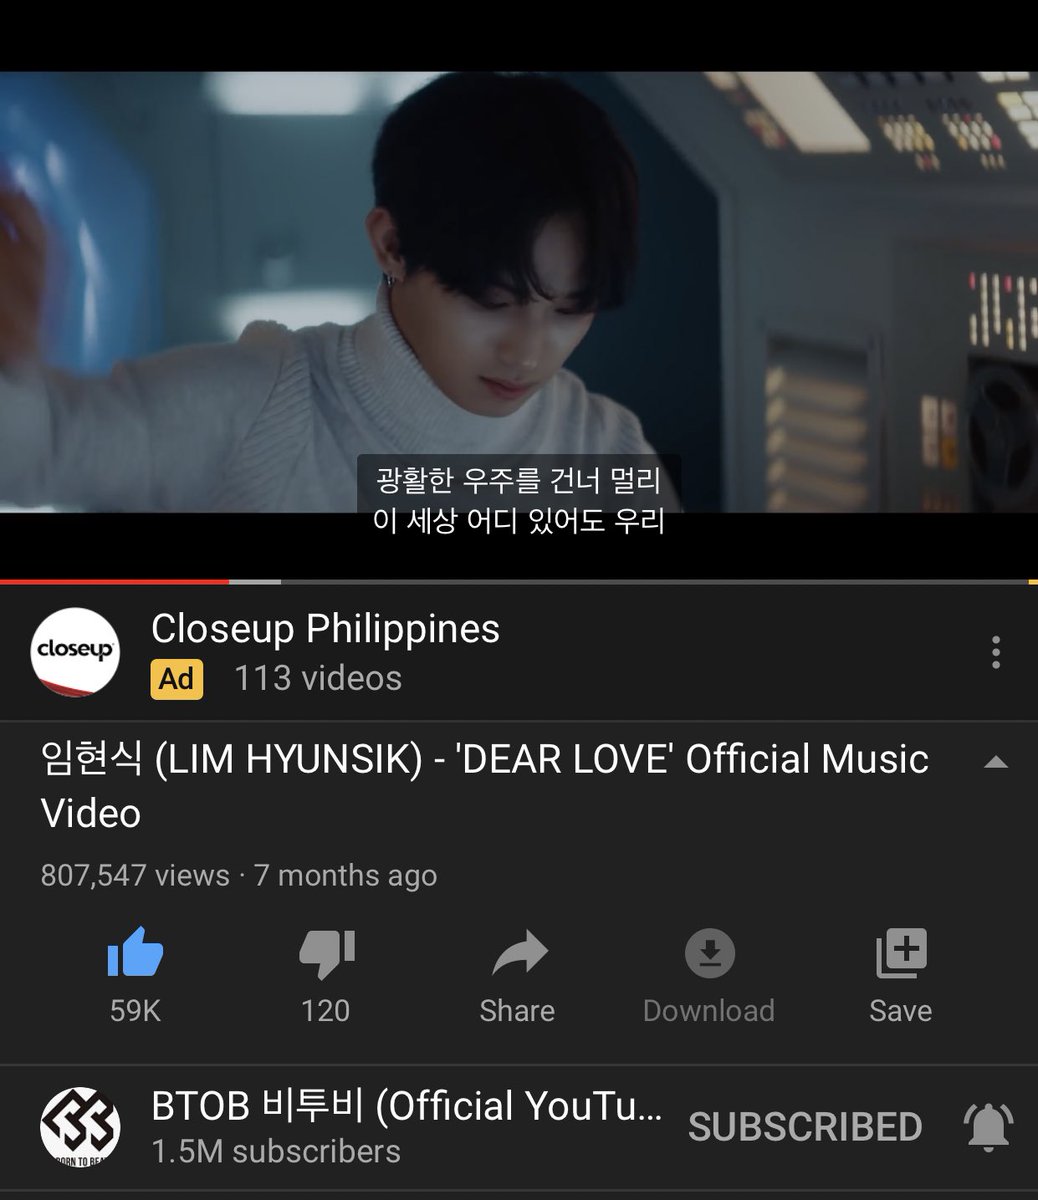 Dear Love view count streaming thread 08JUNE2020 08:43PM KST805,547Since im alr streaming for eunkwang might as well include this too hehe